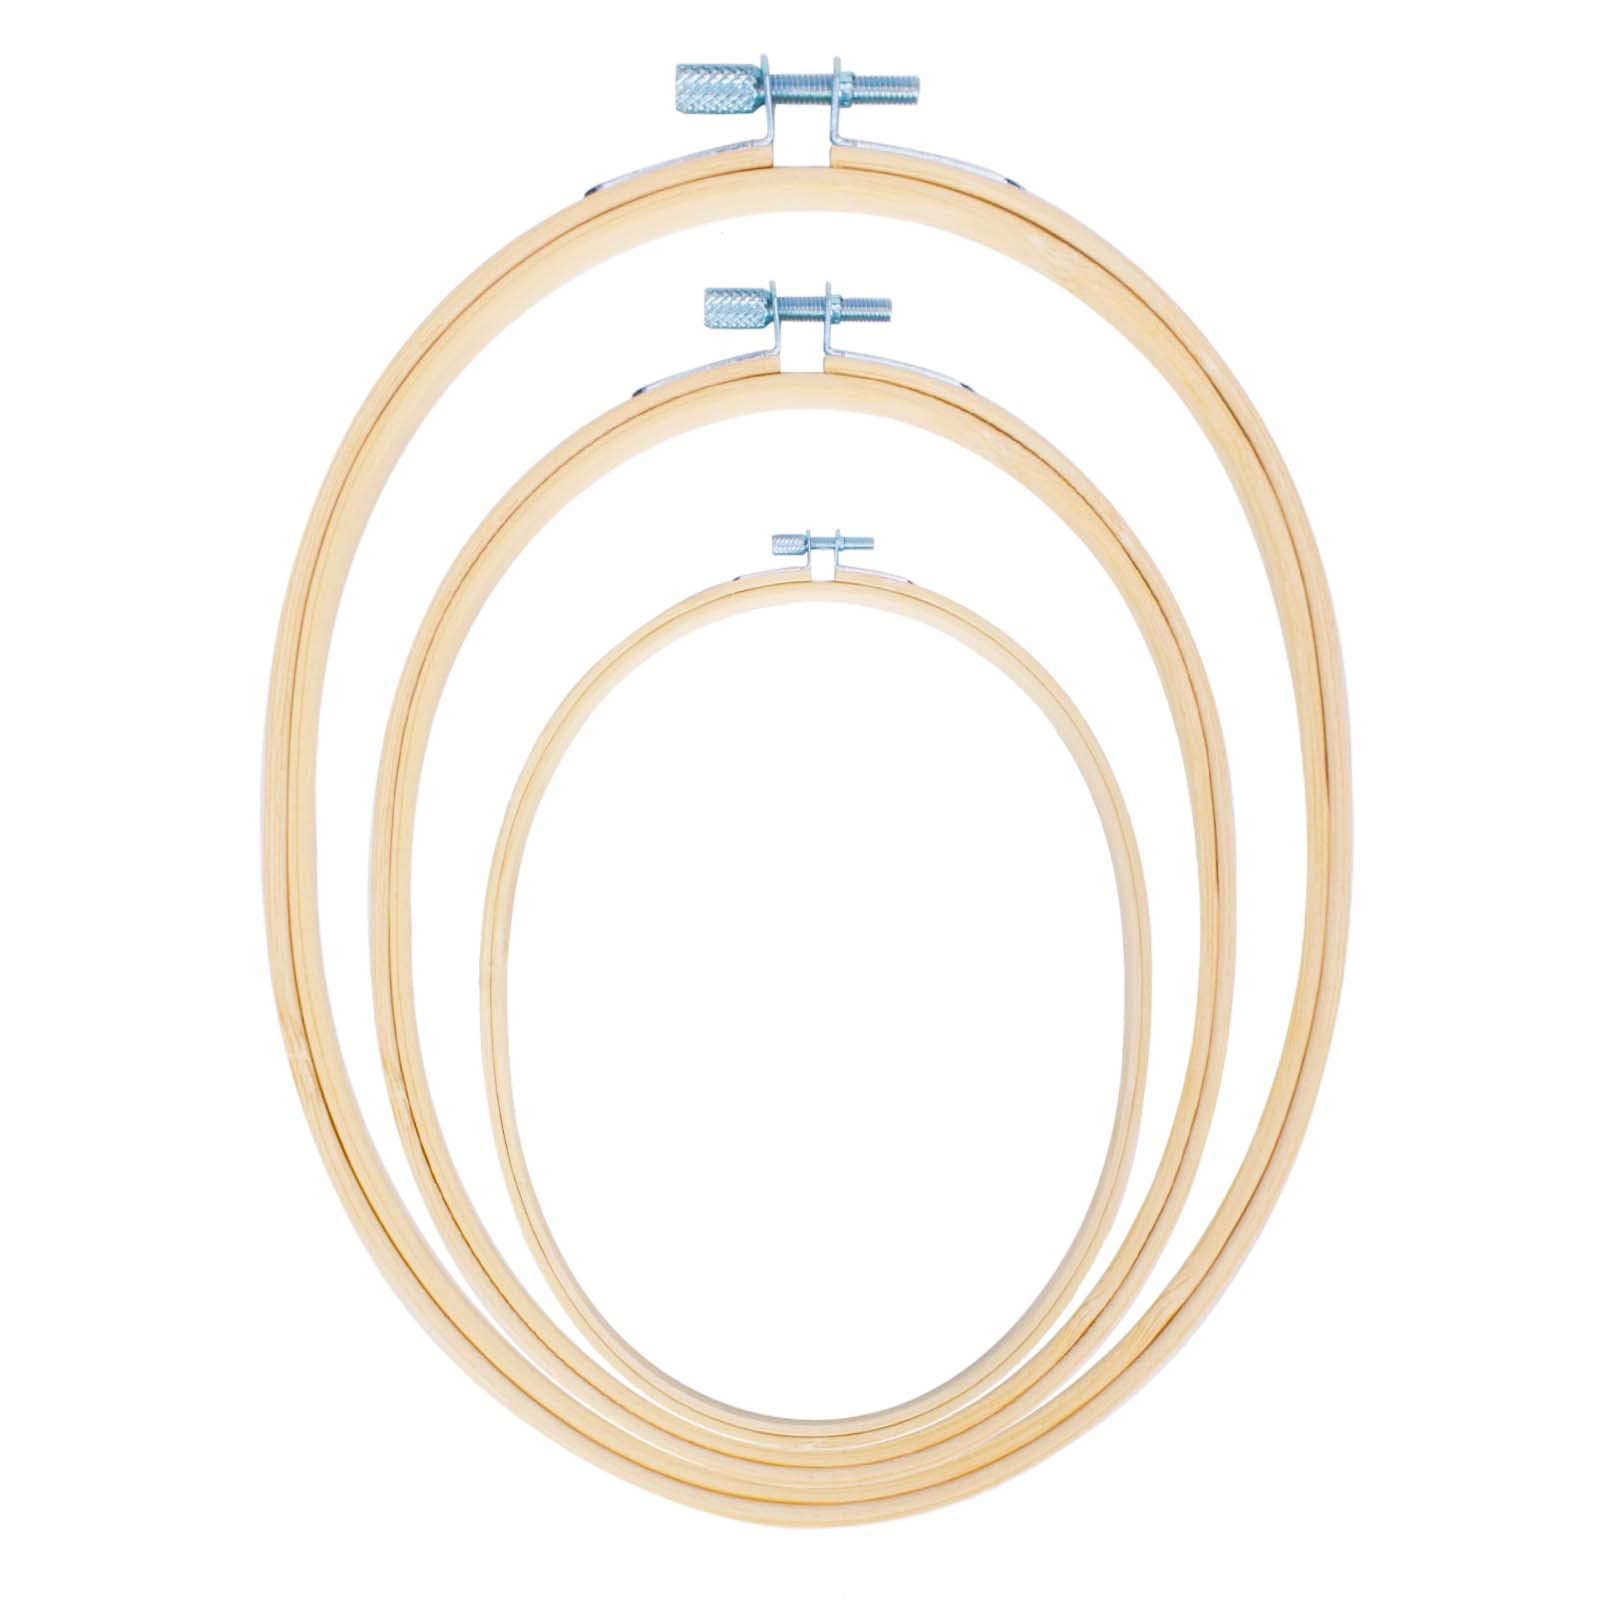 Caydo 3 Pieces 3 Sizes Oval Bamboo Embroidery Hoops Set